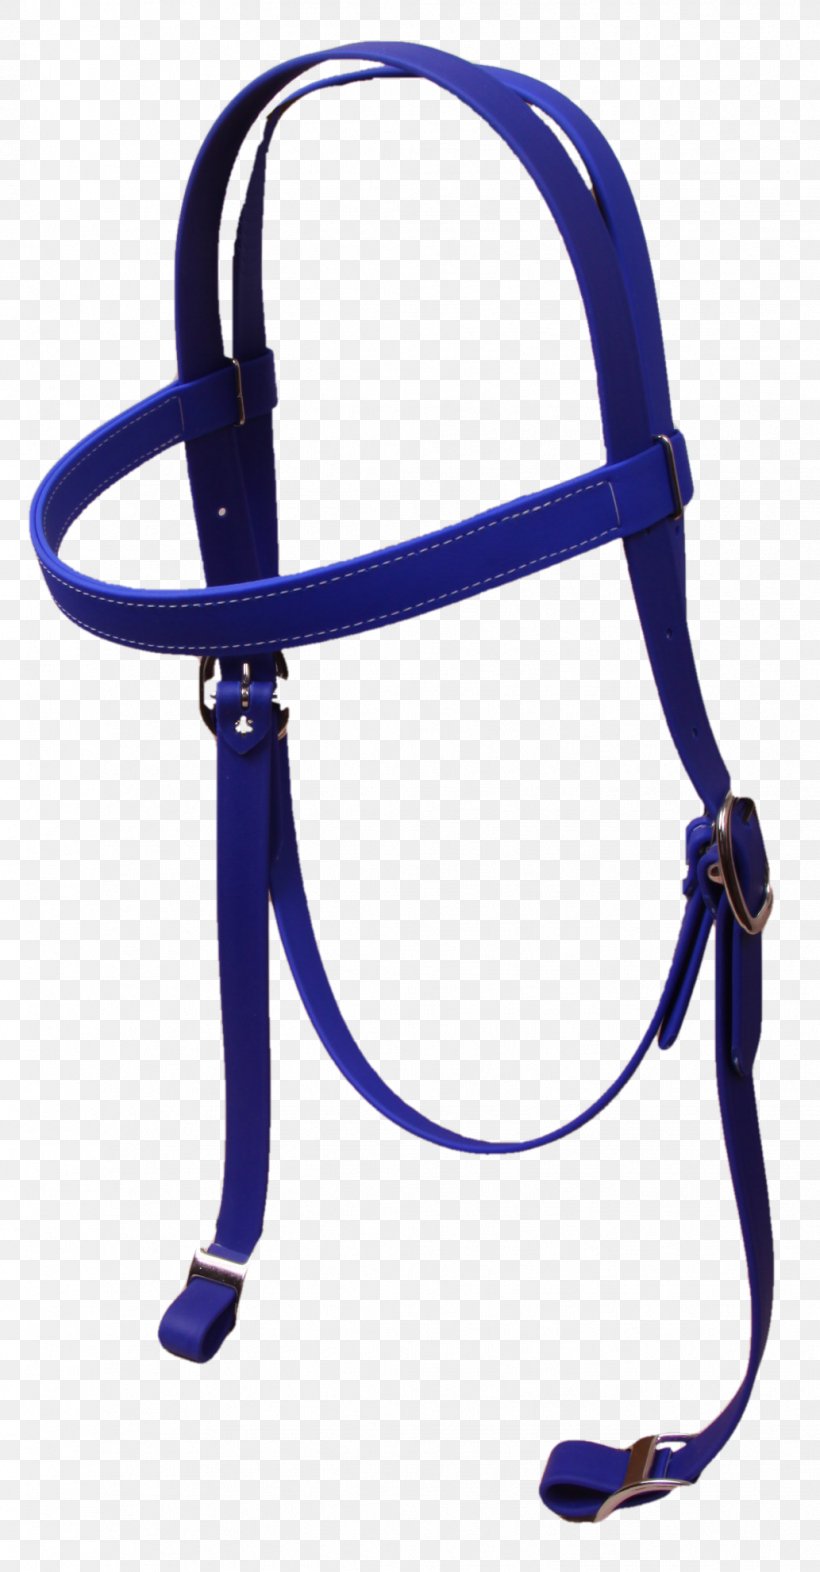 Climbing Harnesses Clothing Accessories Safety Harness Fashion, PNG, 1033x1981px, Climbing Harnesses, Blue, Climbing, Climbing Harness, Clothing Accessories Download Free